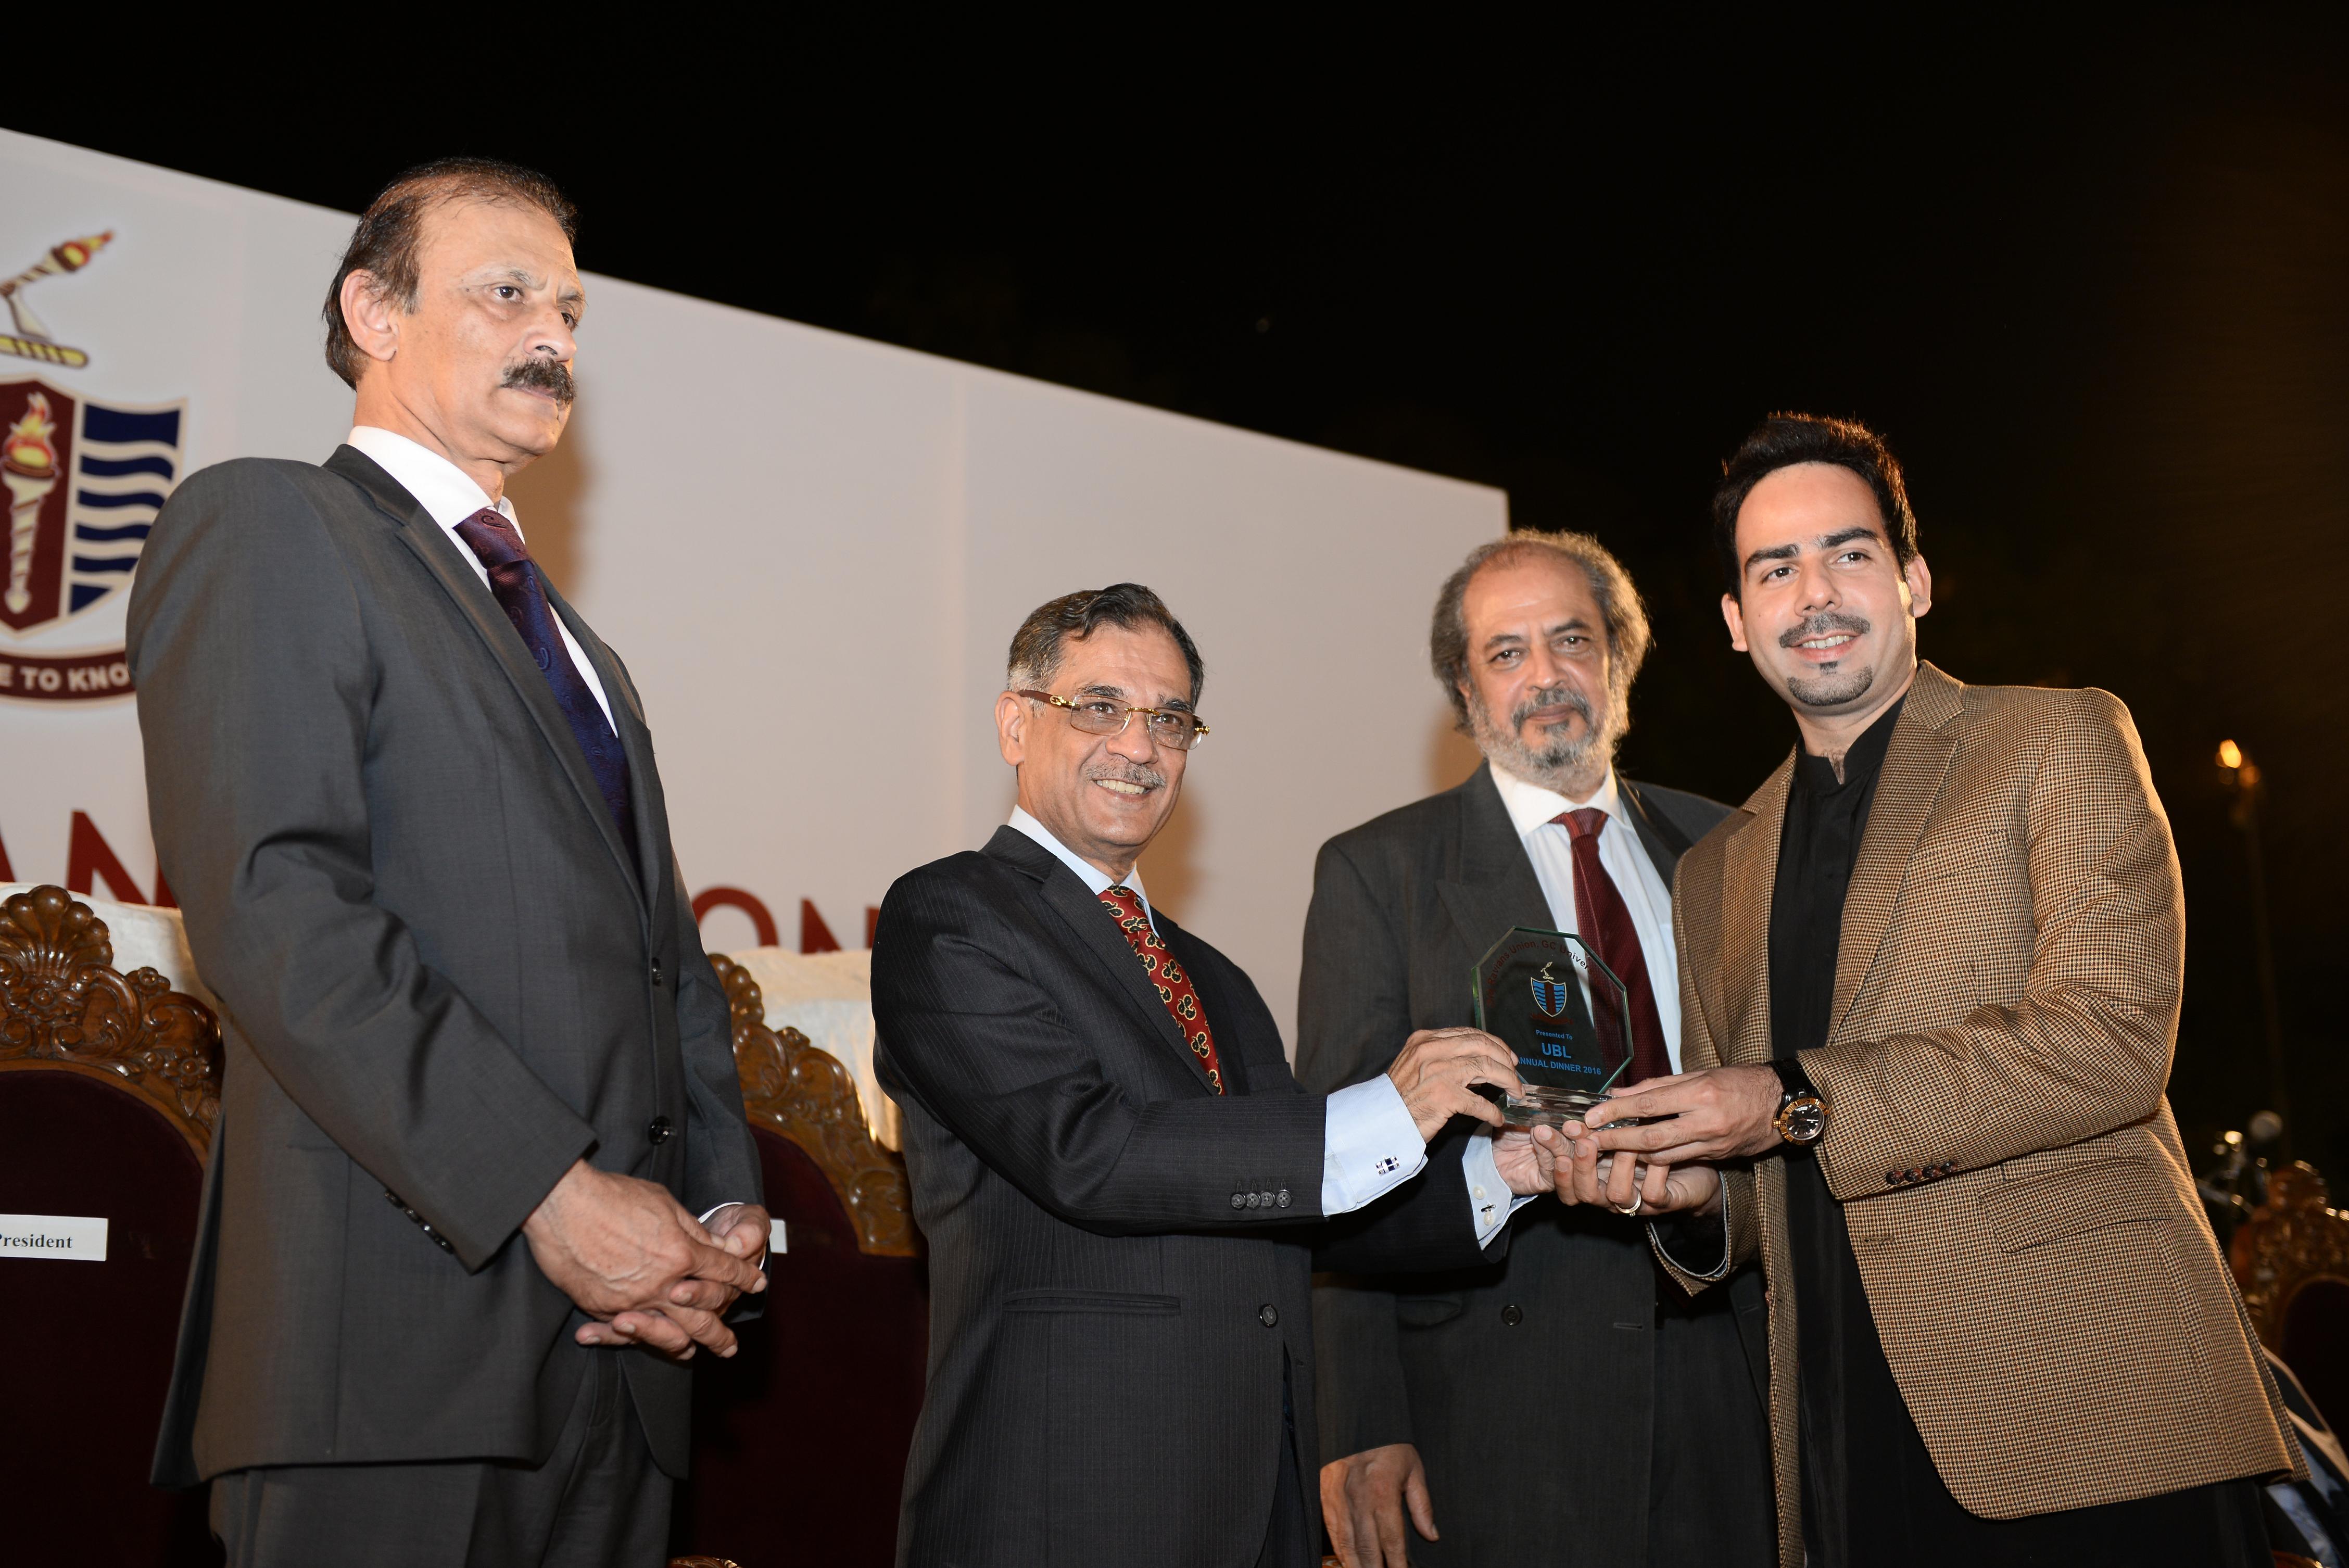 shield received by representative of UBL